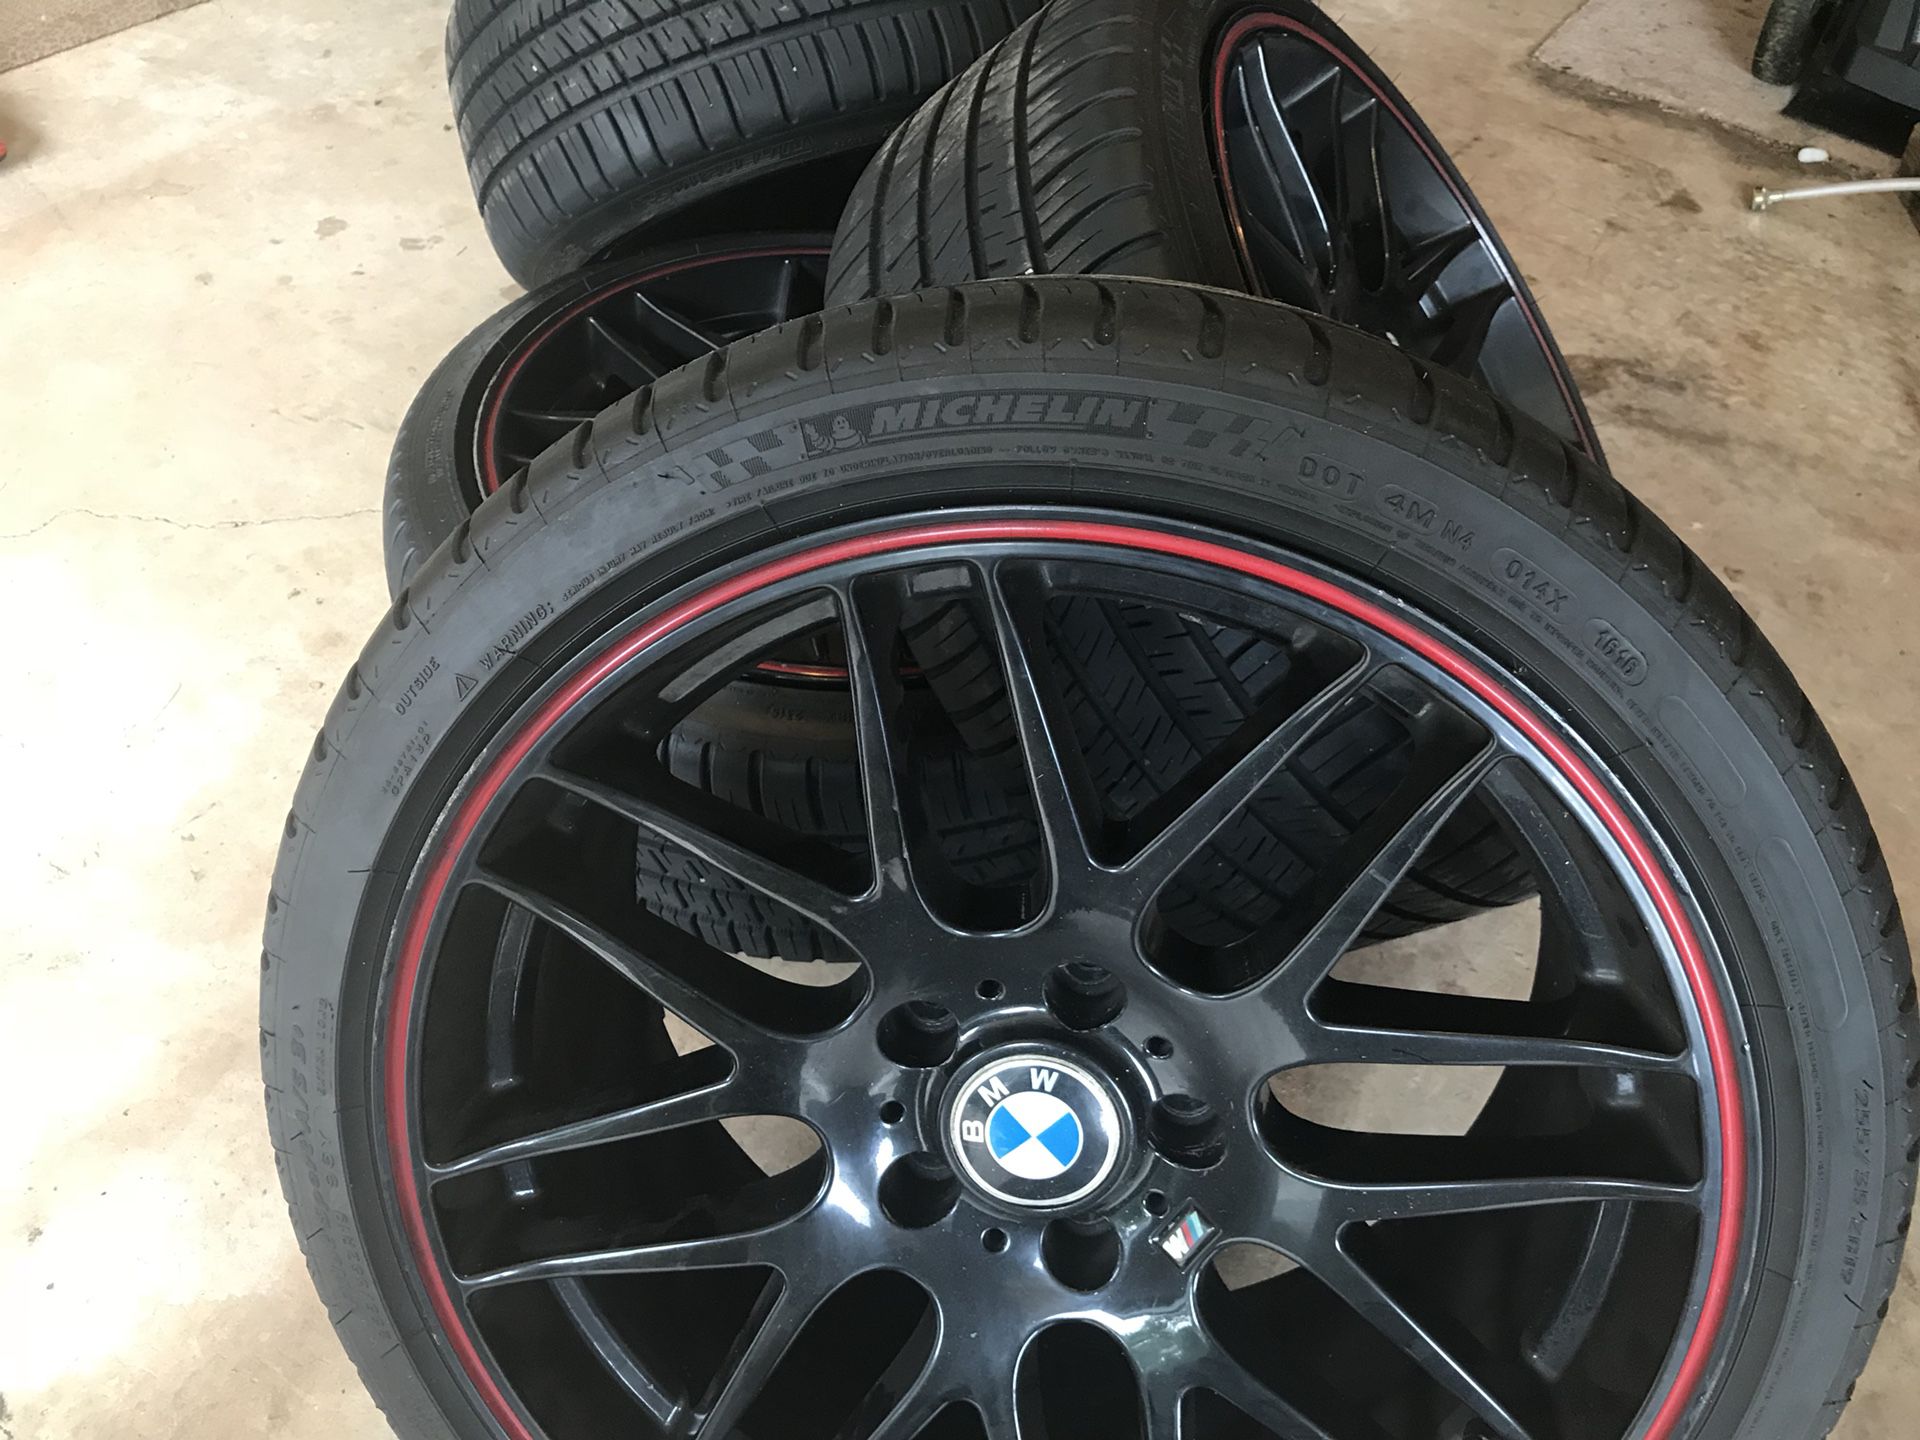 Bmw CSL wheels and tires New tires